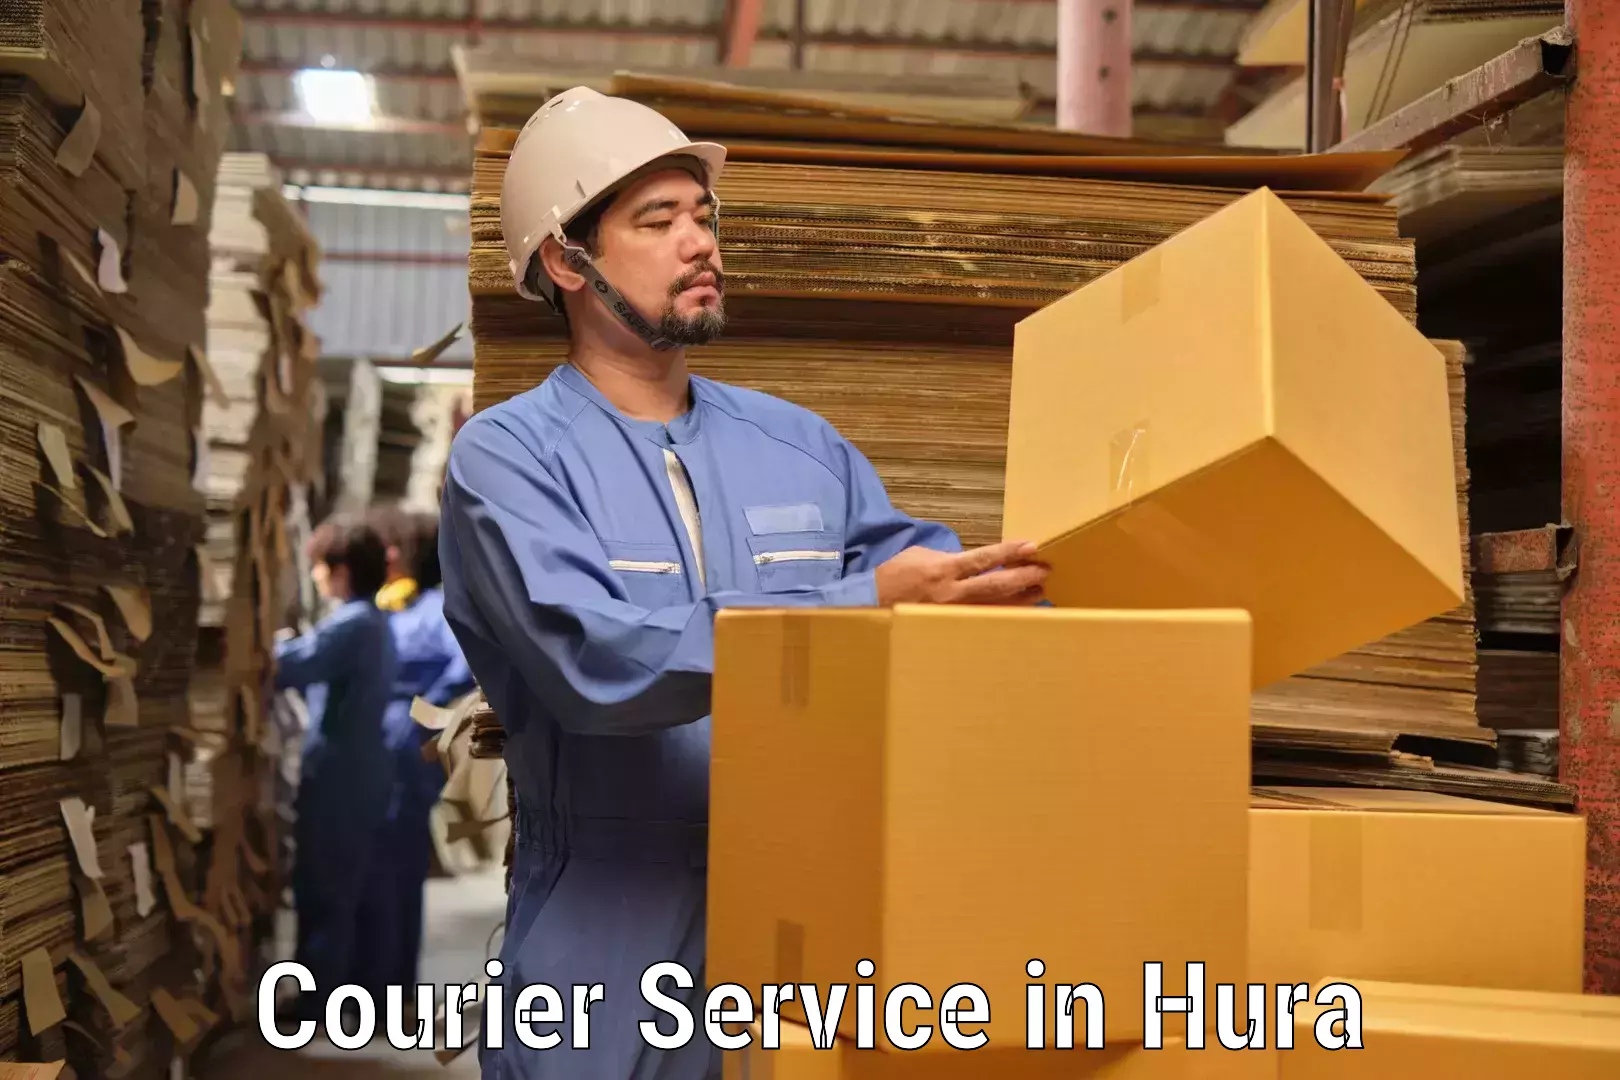 Courier service innovation in Hura